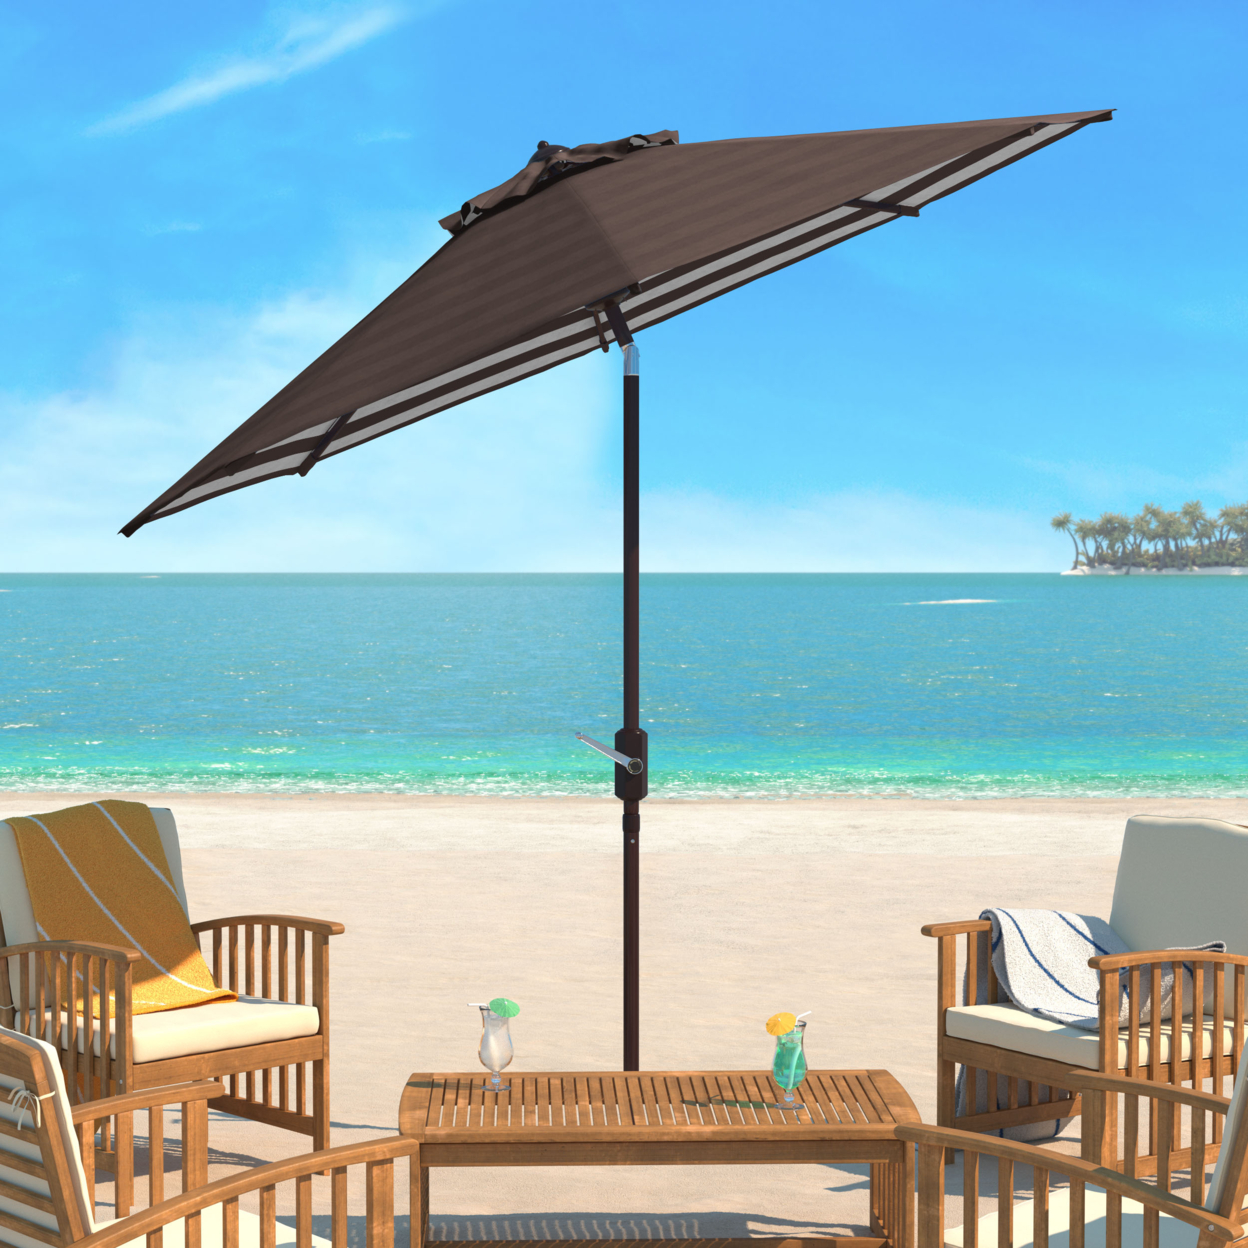 SAFAVIEH Outdoor Collection Athens Inside Out Striped 9-Foot Umbrella Brown/White